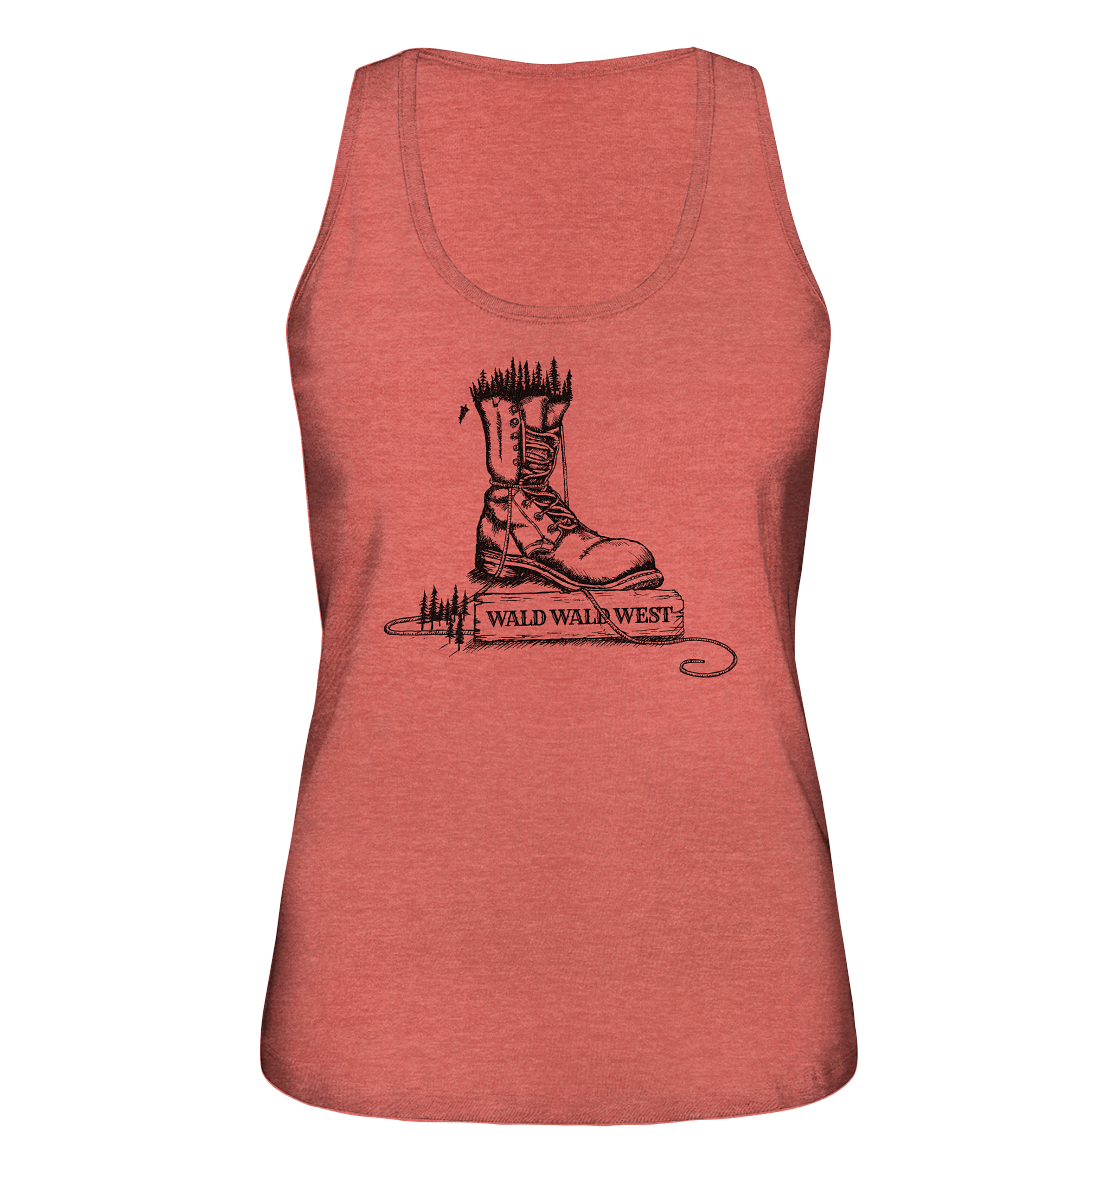 front-ladies-organic-tank-top-e05651-1116x.png